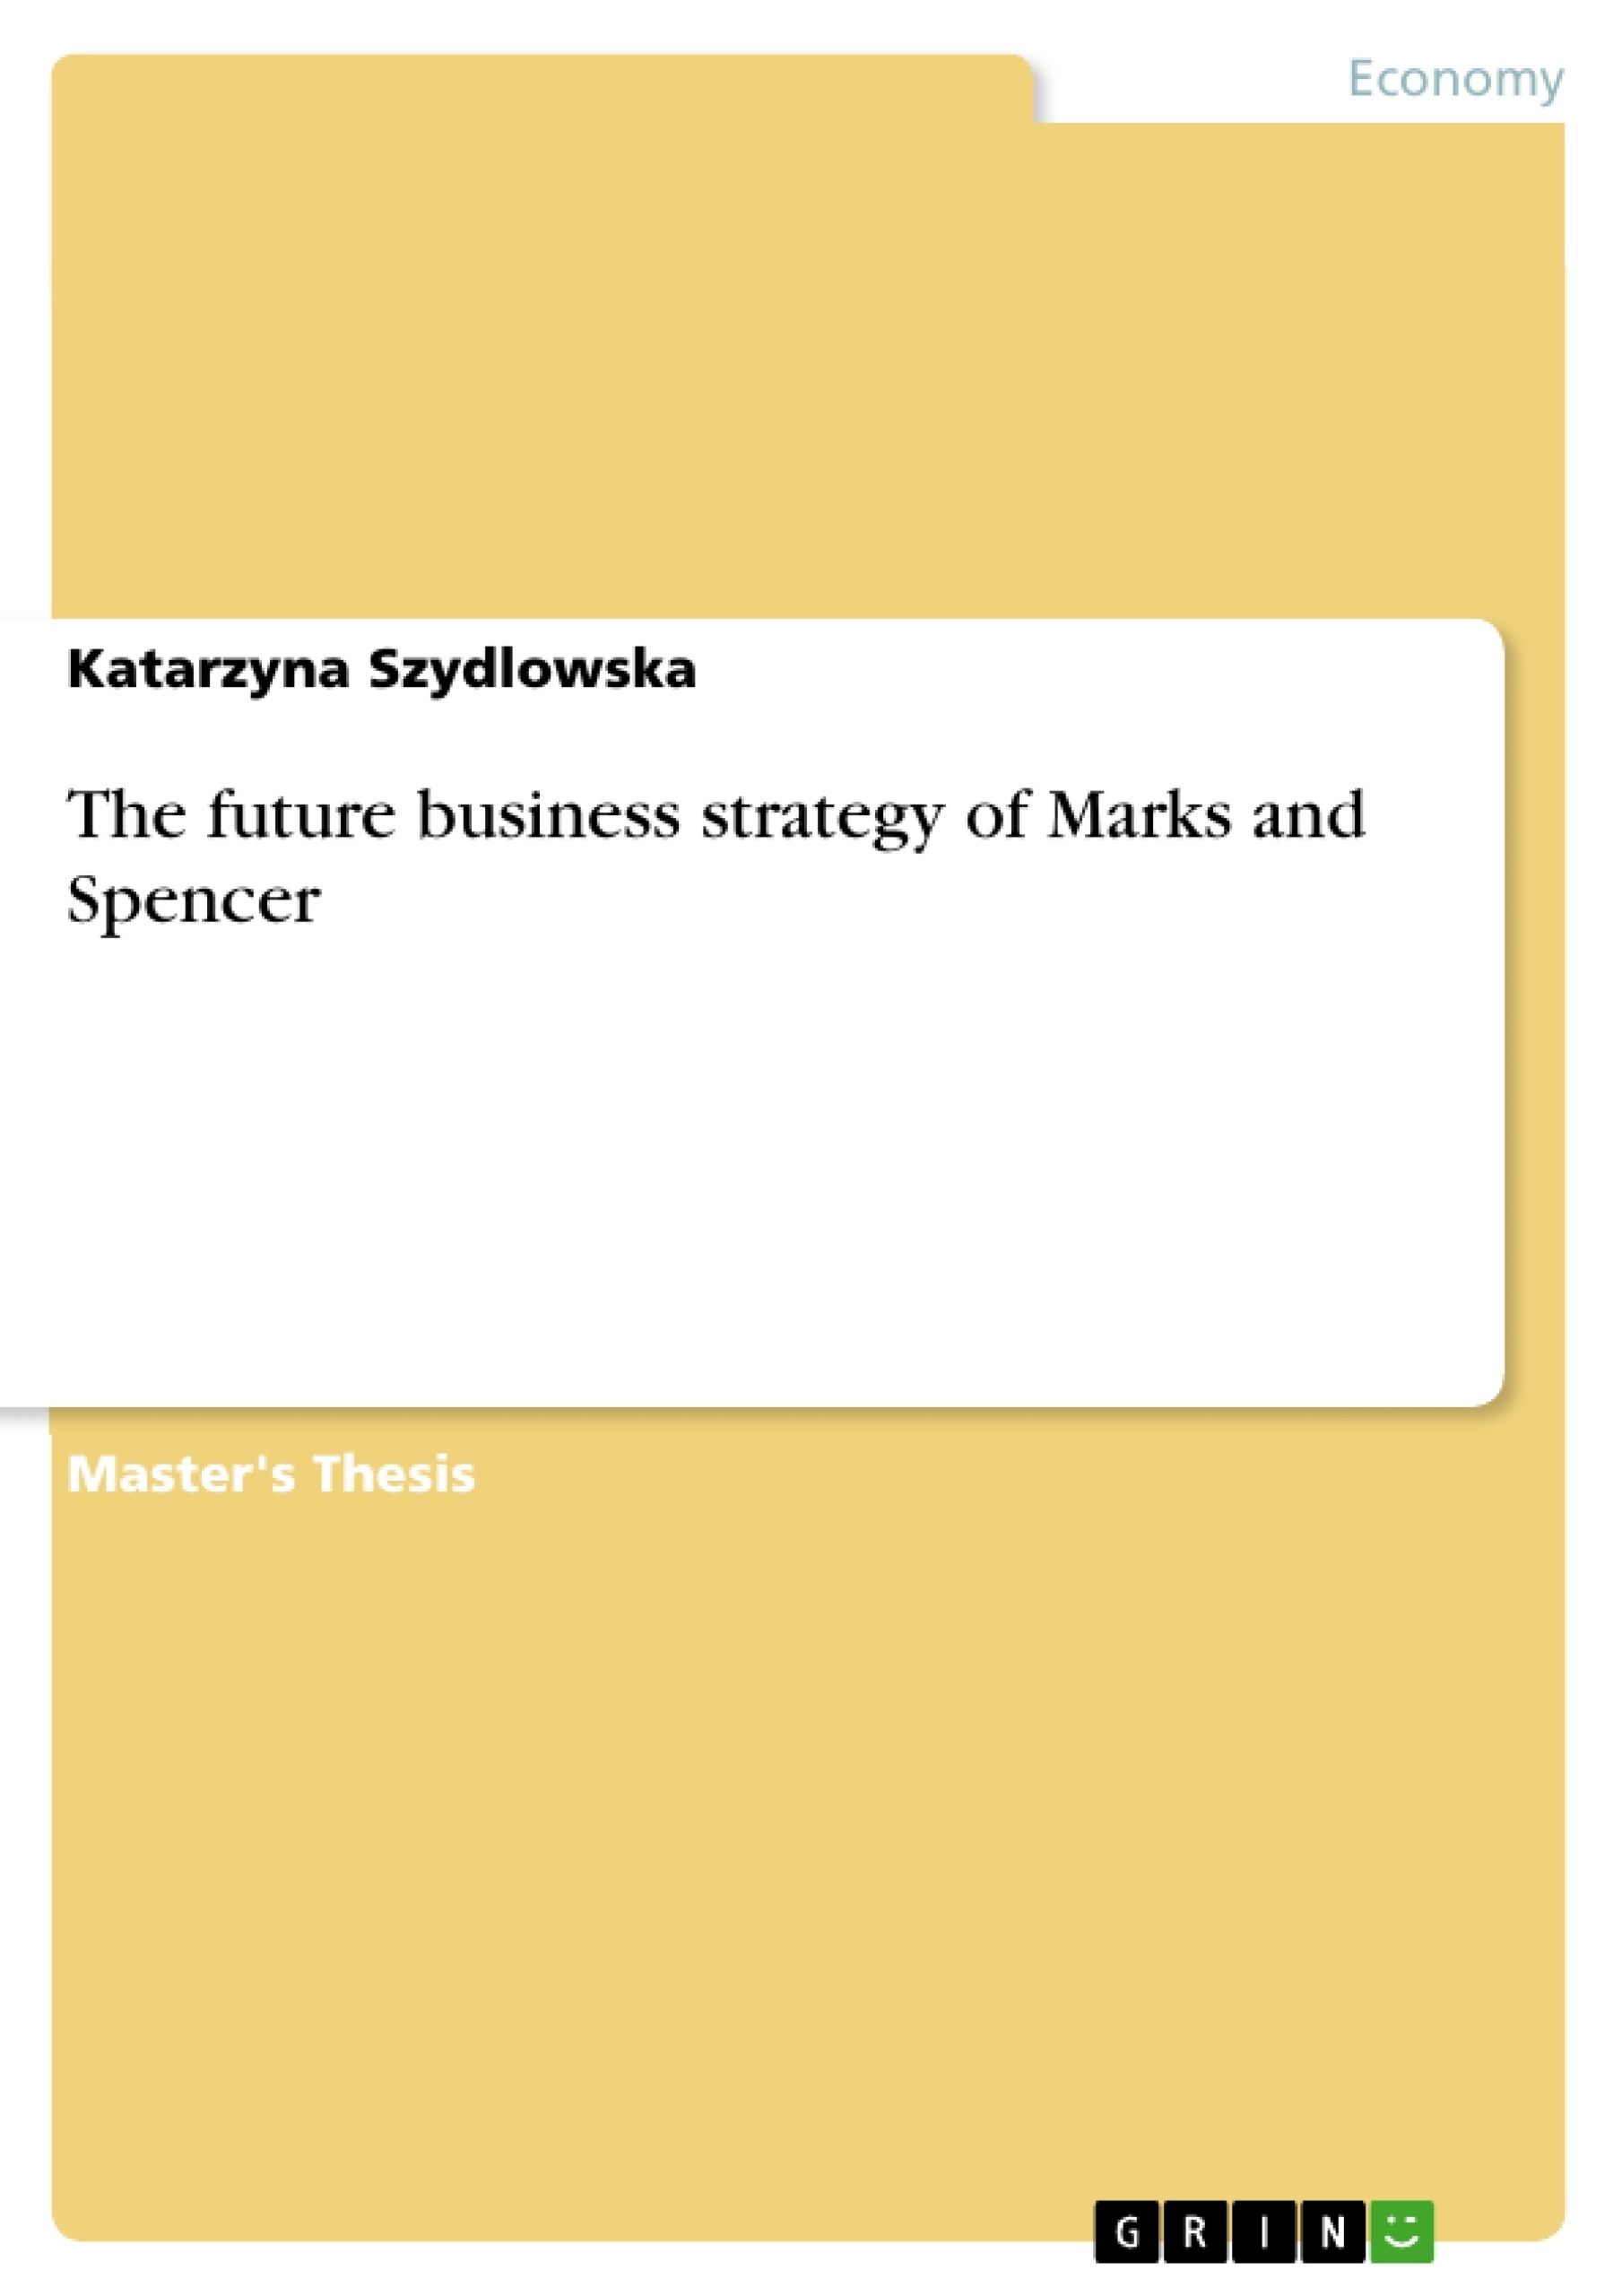 Title: The future business strategy of Marks and Spencer